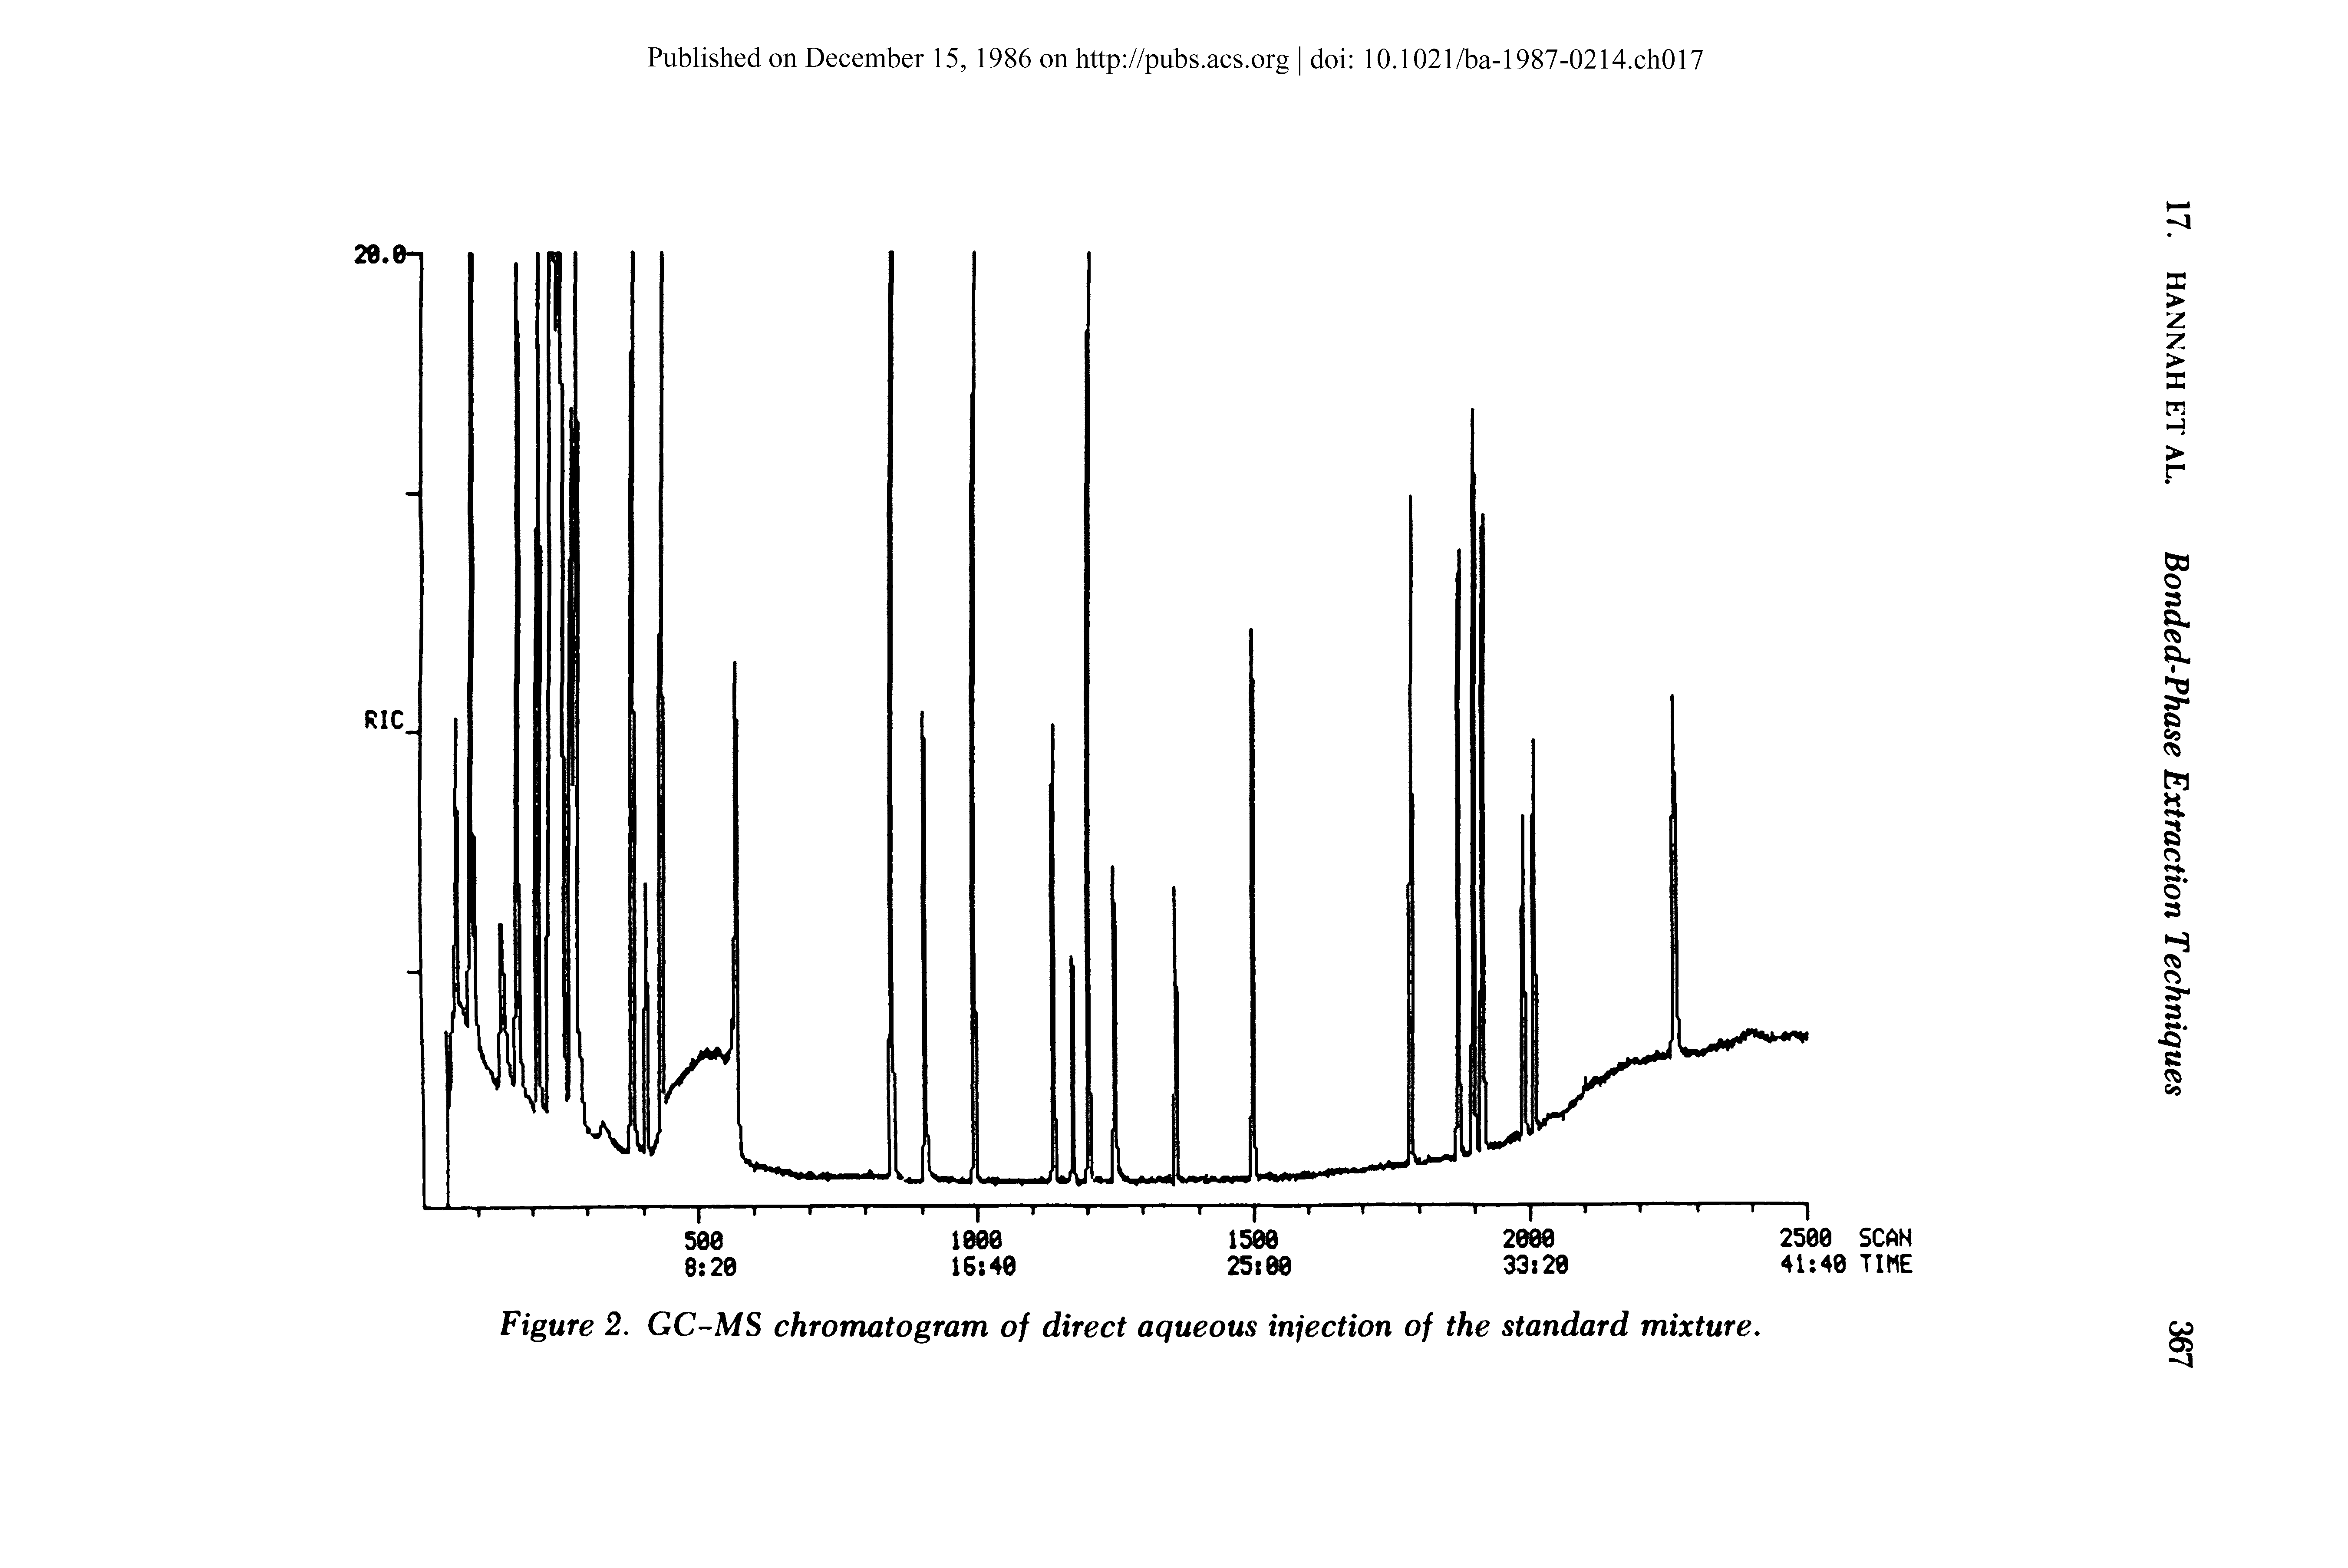 Figure 2. GC-MS chromatogram of direct aqueous injection of the standard mixture.